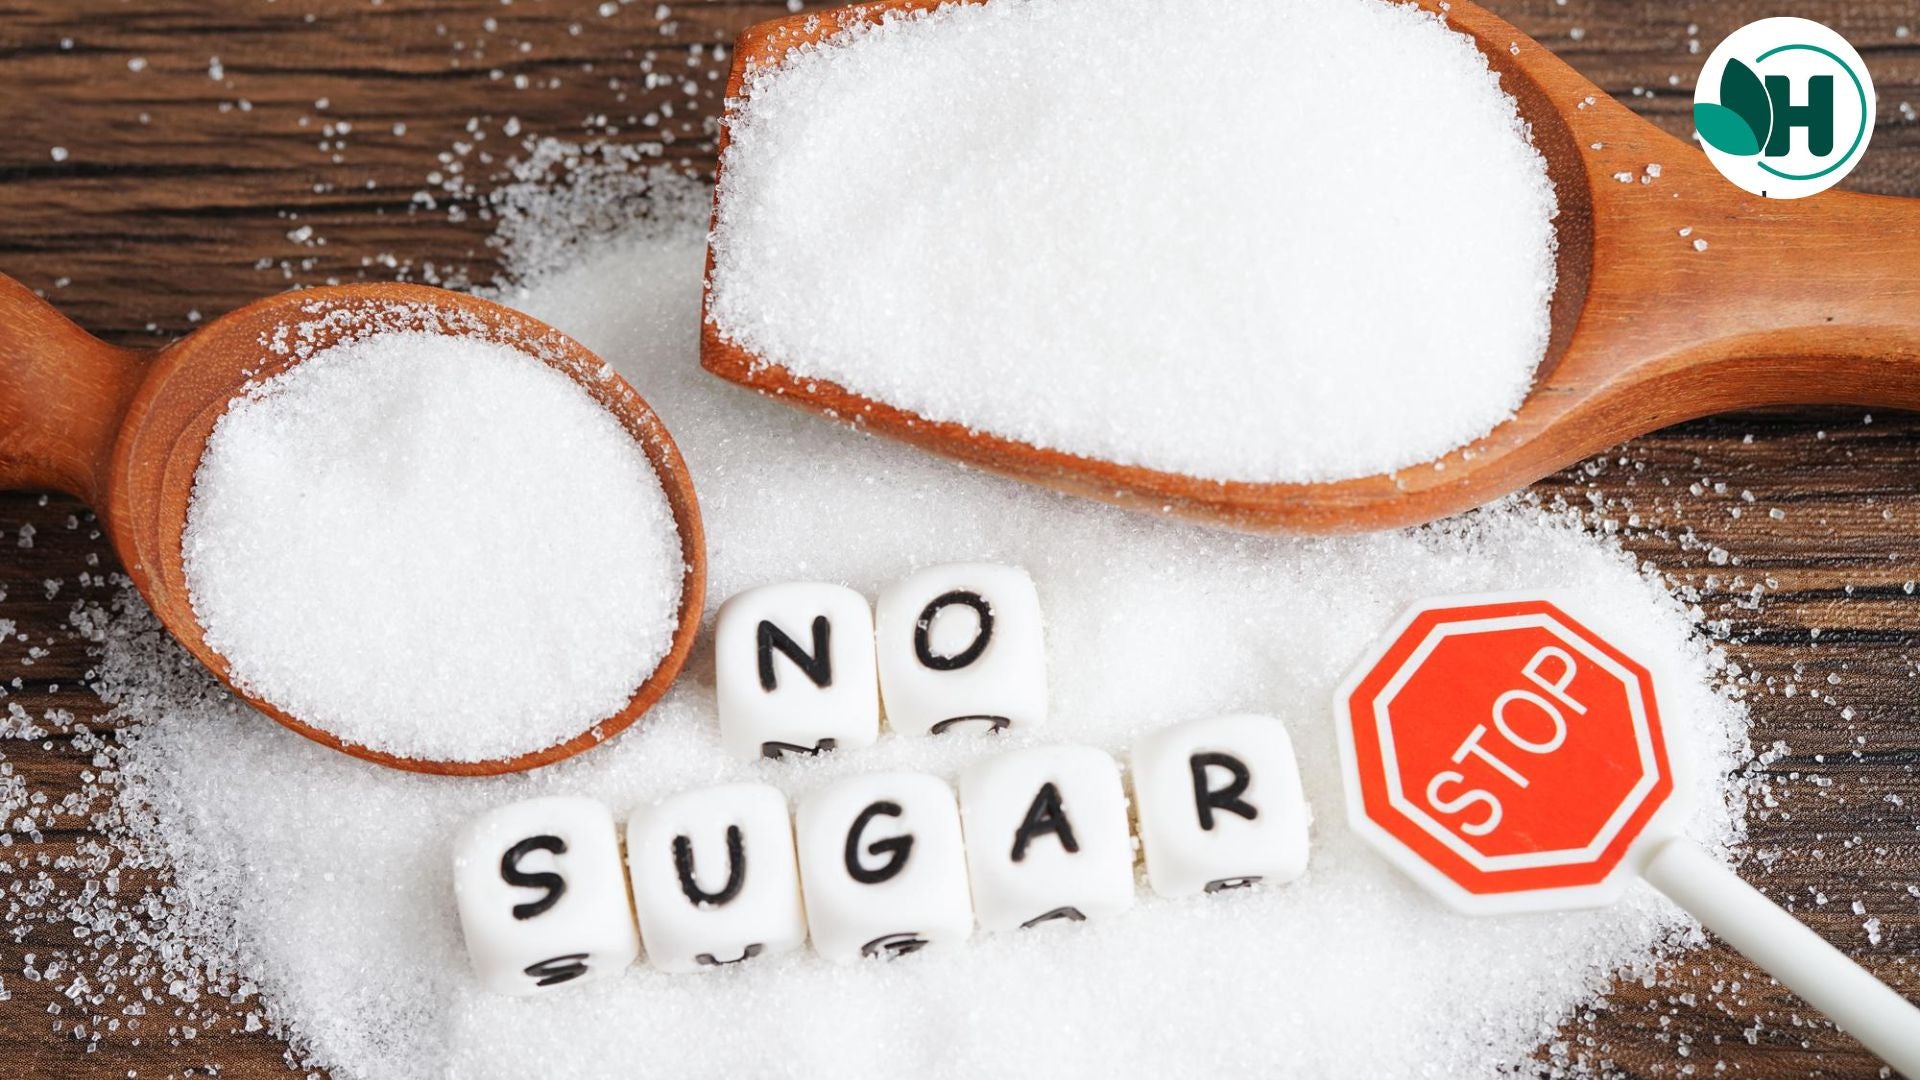 Why Sugar is bad for you?